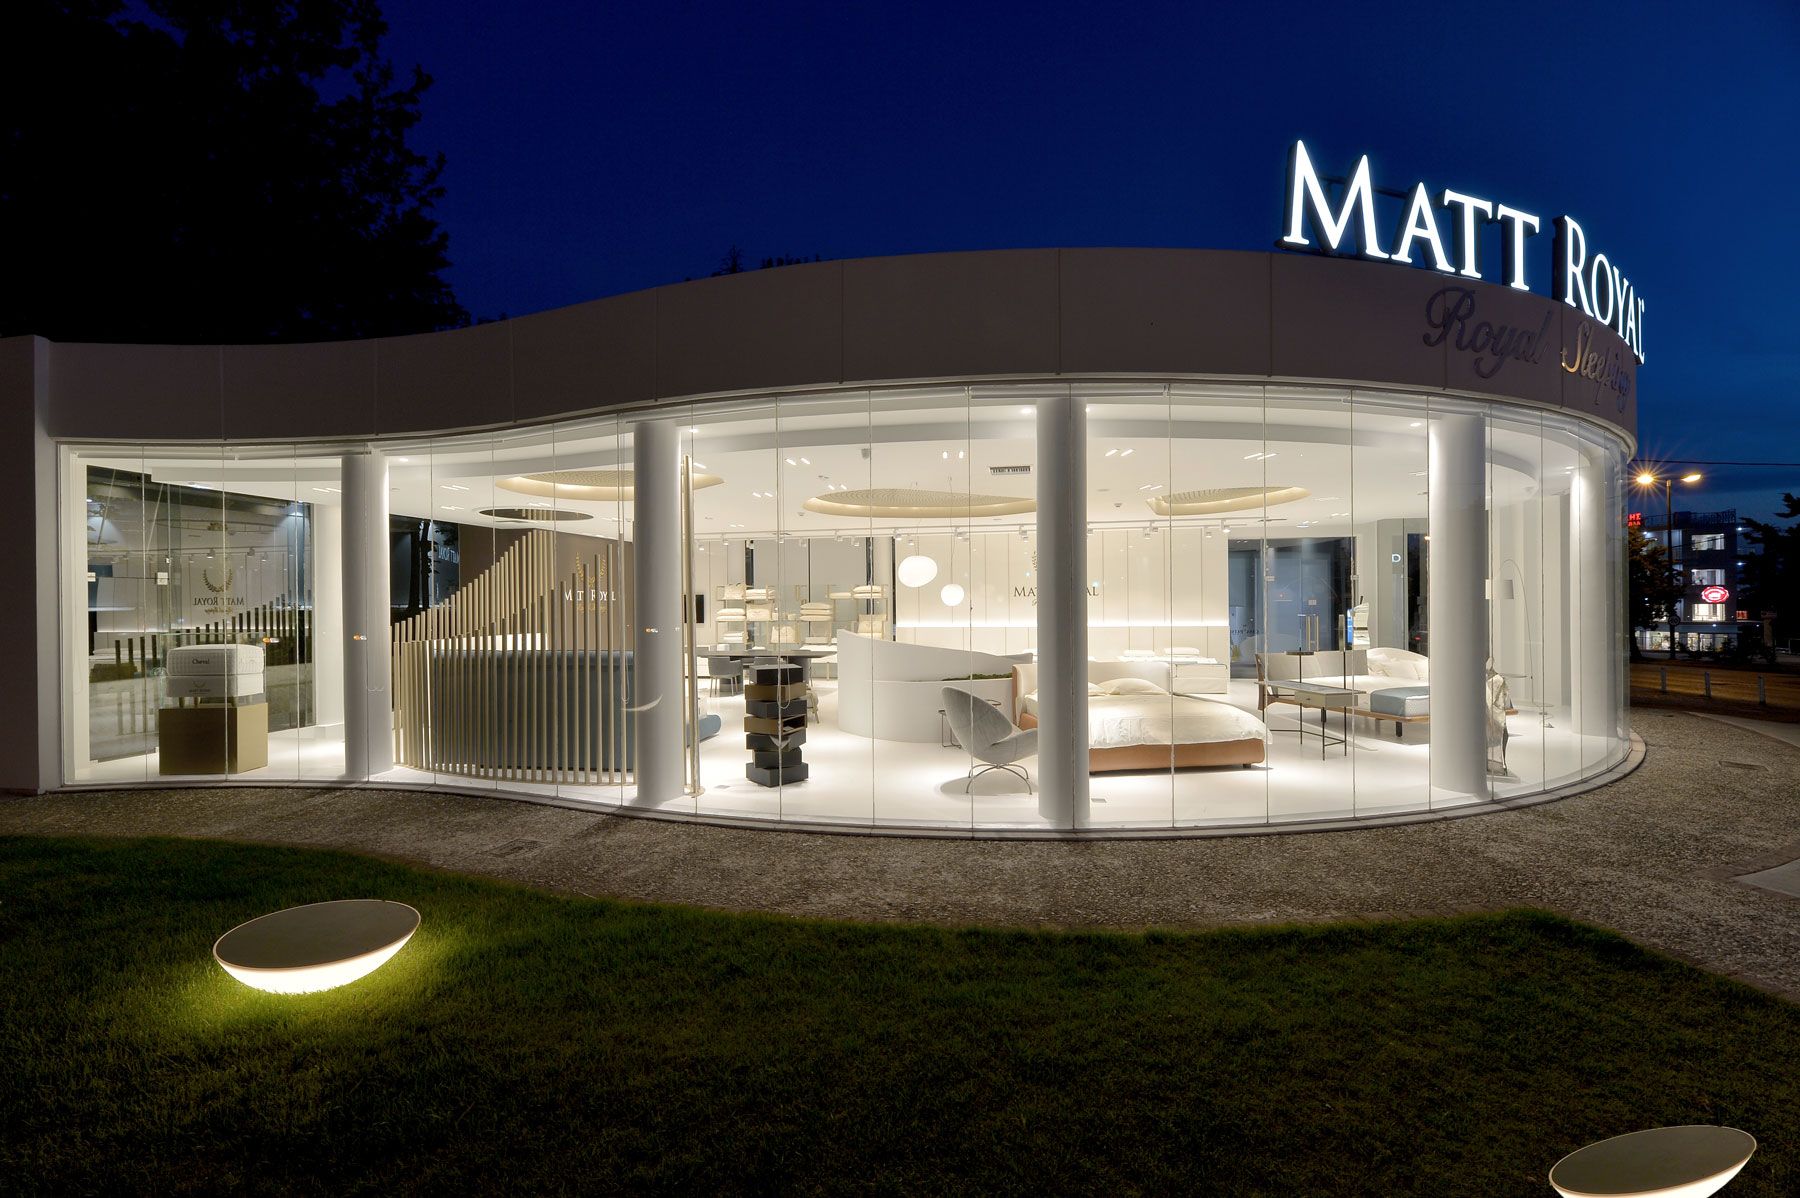 Matt Royal Flagship store in Athens Nous-Noos Interior Architects